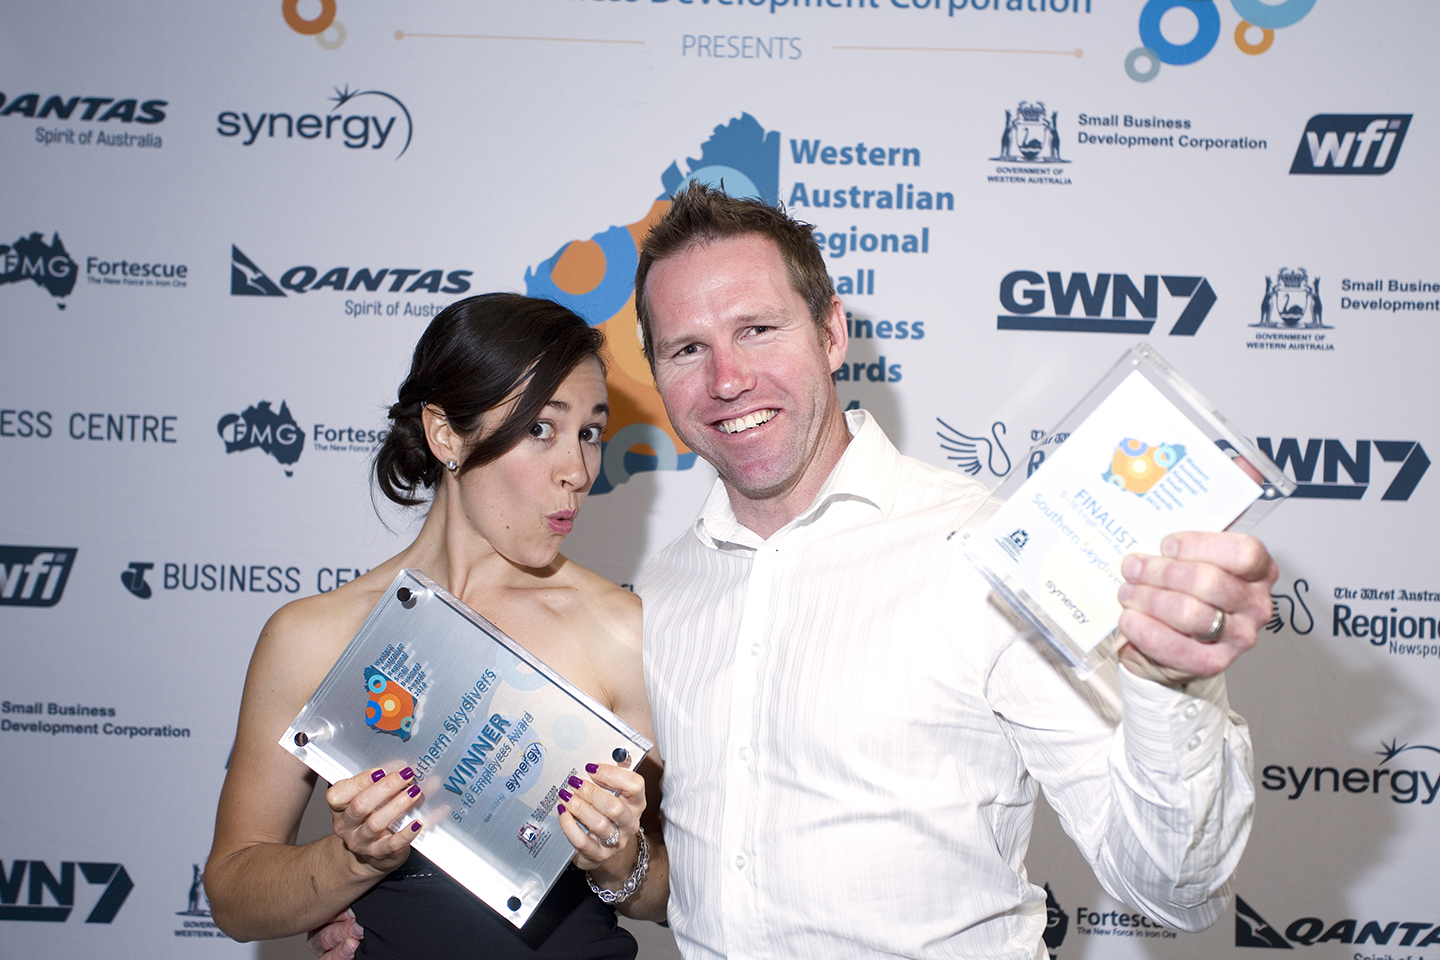 Southern Skydivers Wins Gold at the WA Regional Small Business Awards